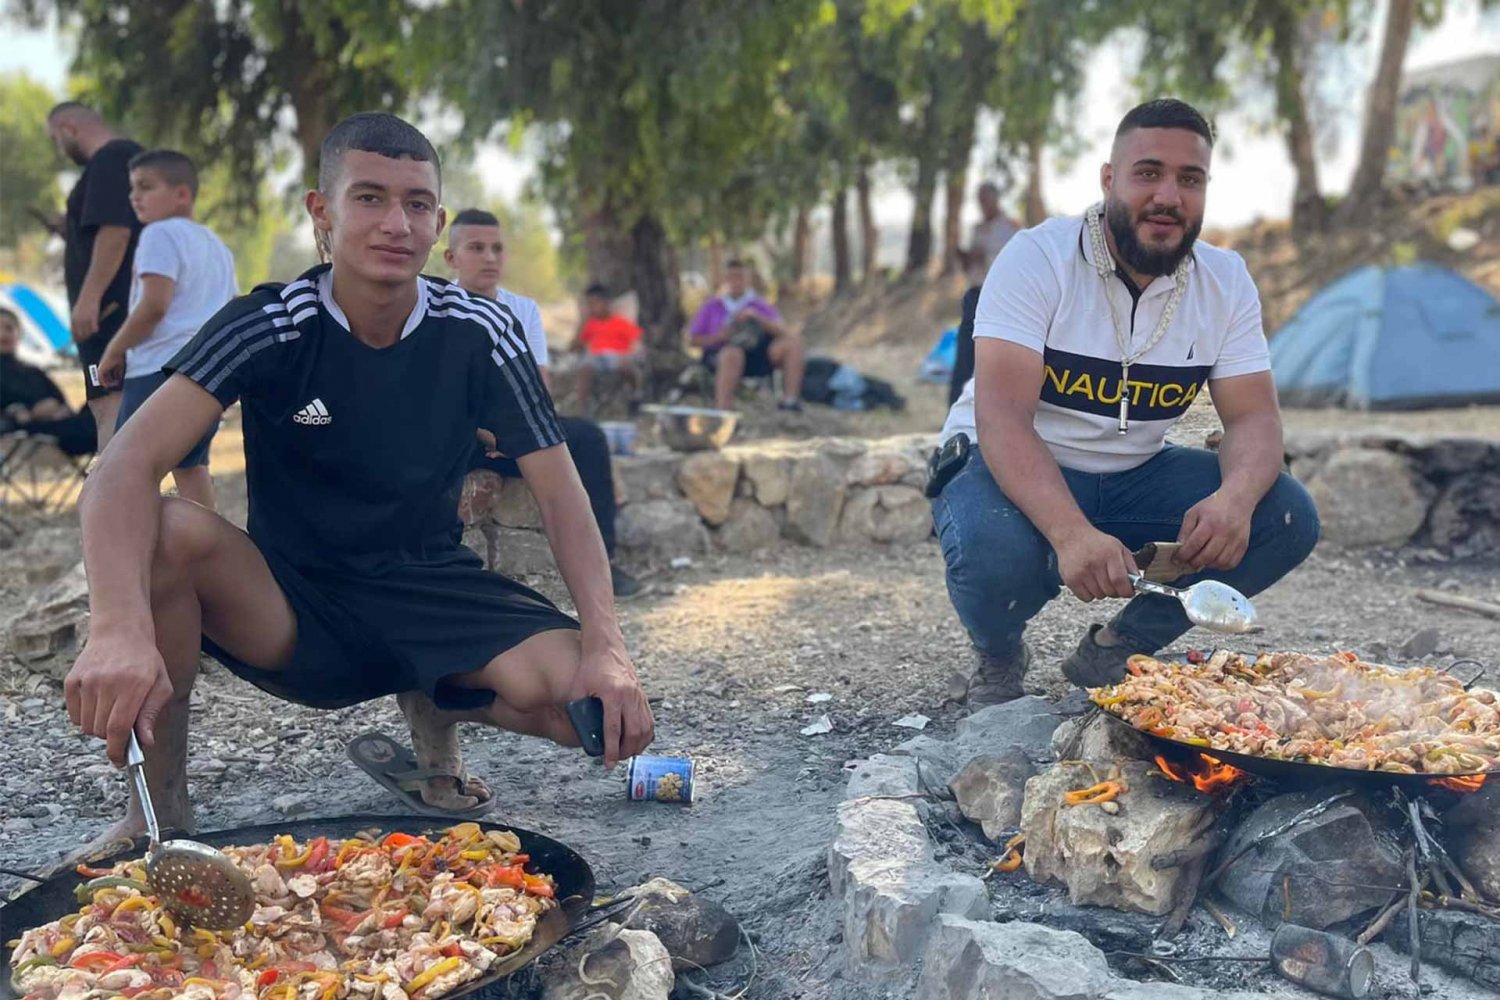 Dinner cooked campsite-style over the fire during “Silwan Summer 2022,” a youth camp for the al-Bustan district scout group